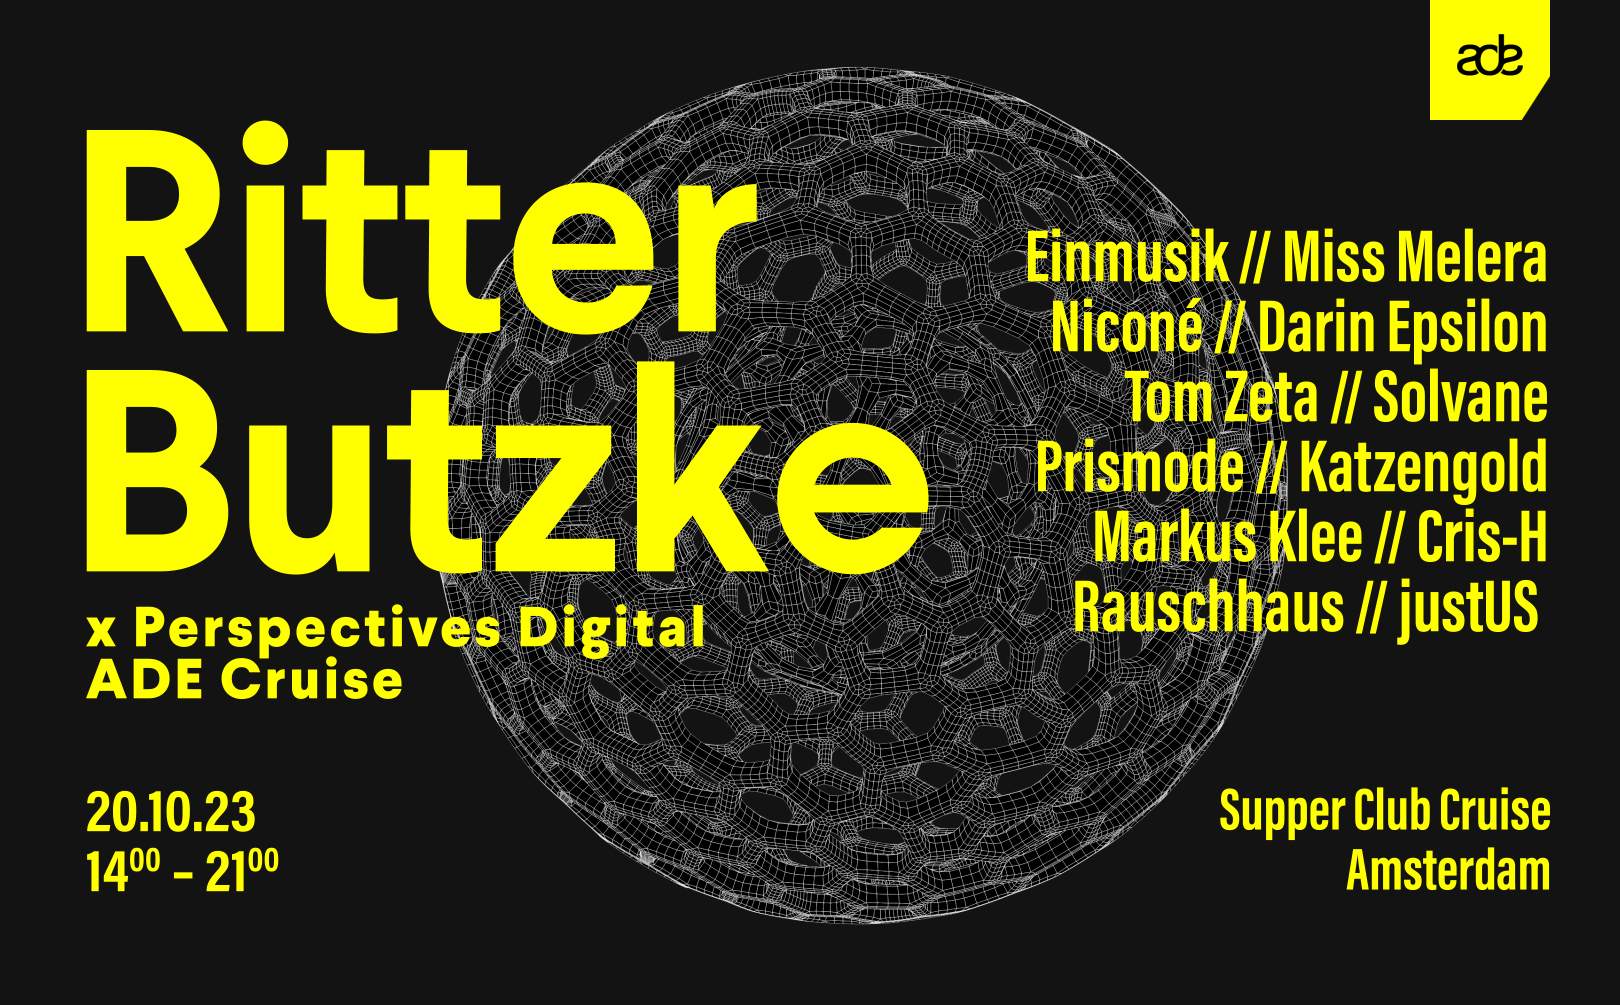 sold out / Ritter Butzke x Perspectives Digital ADE Cruise - Página frontal